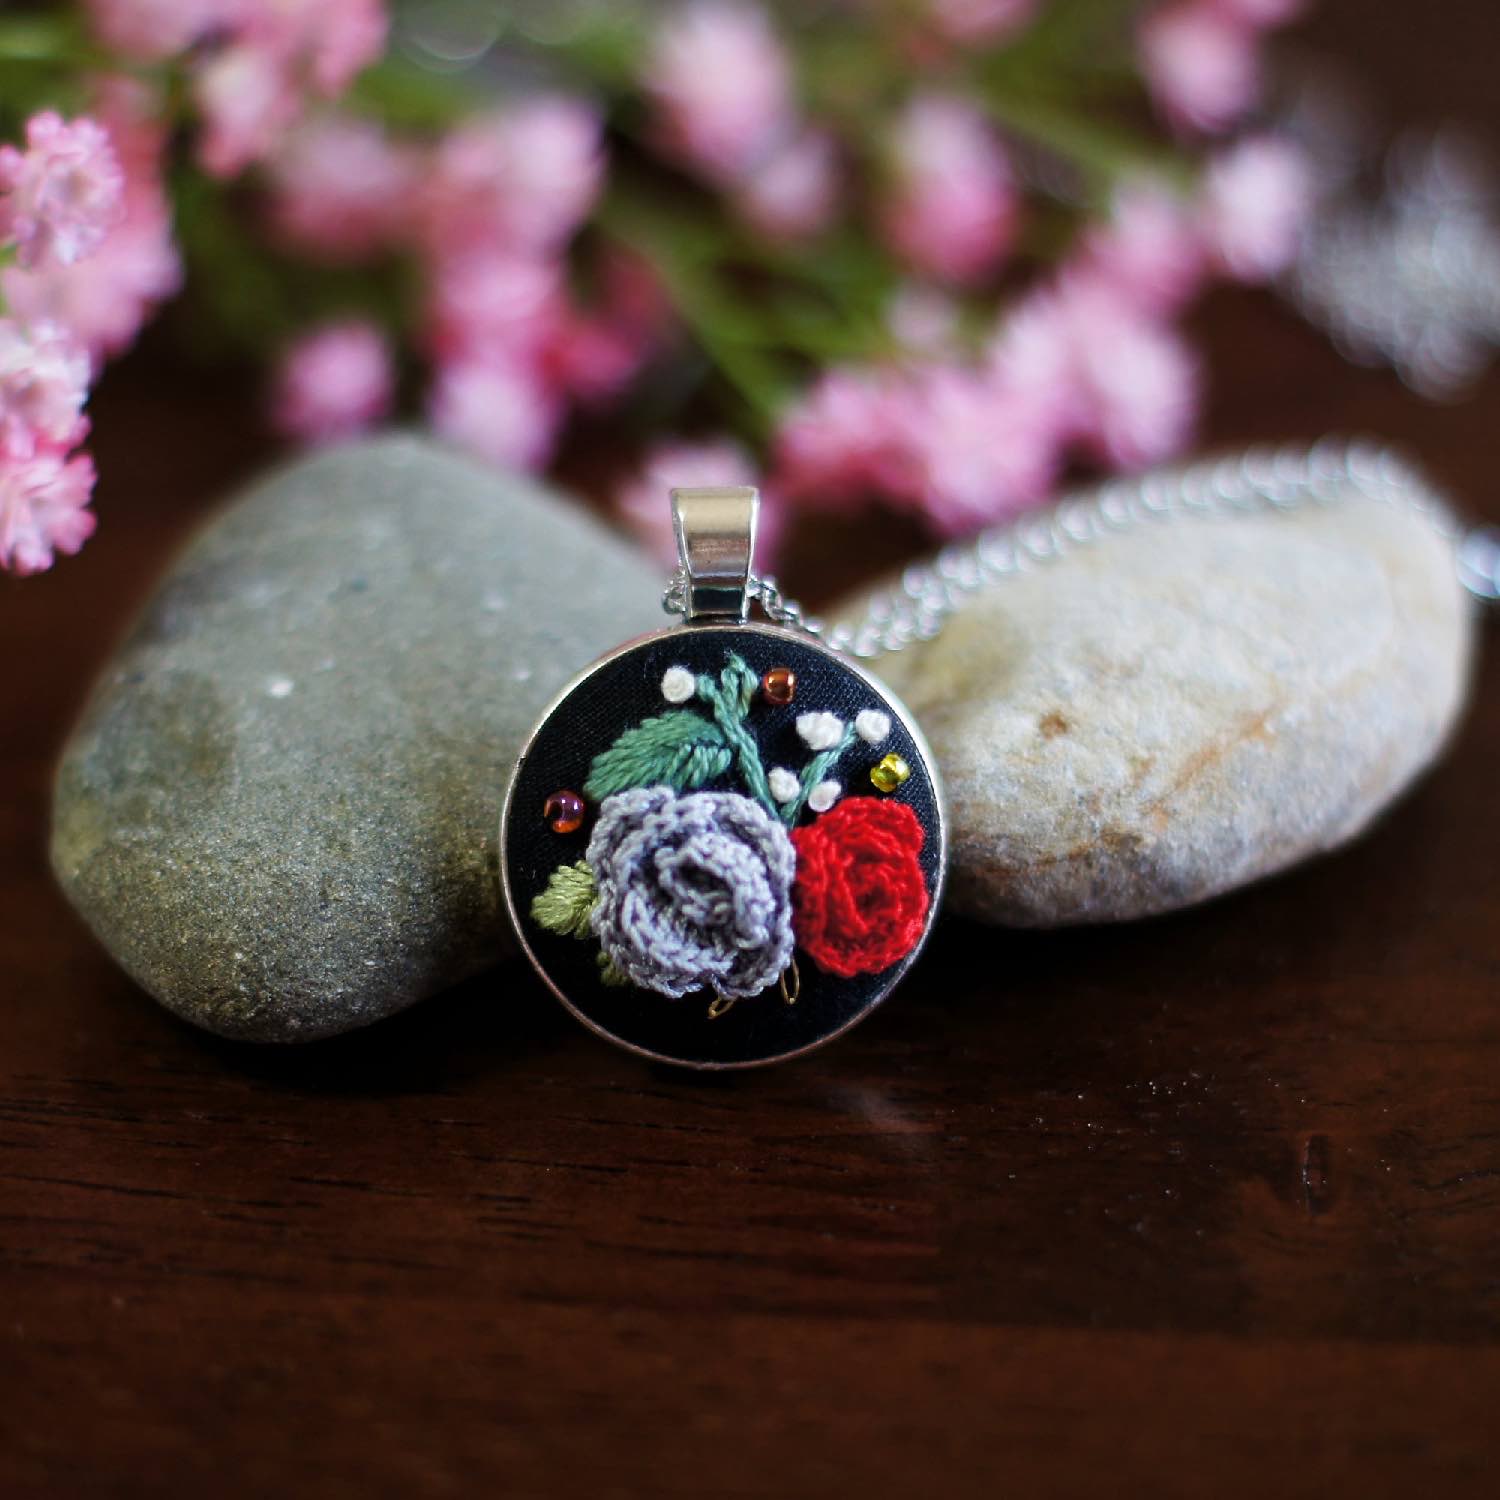 embroidery pendant - gray and red rose